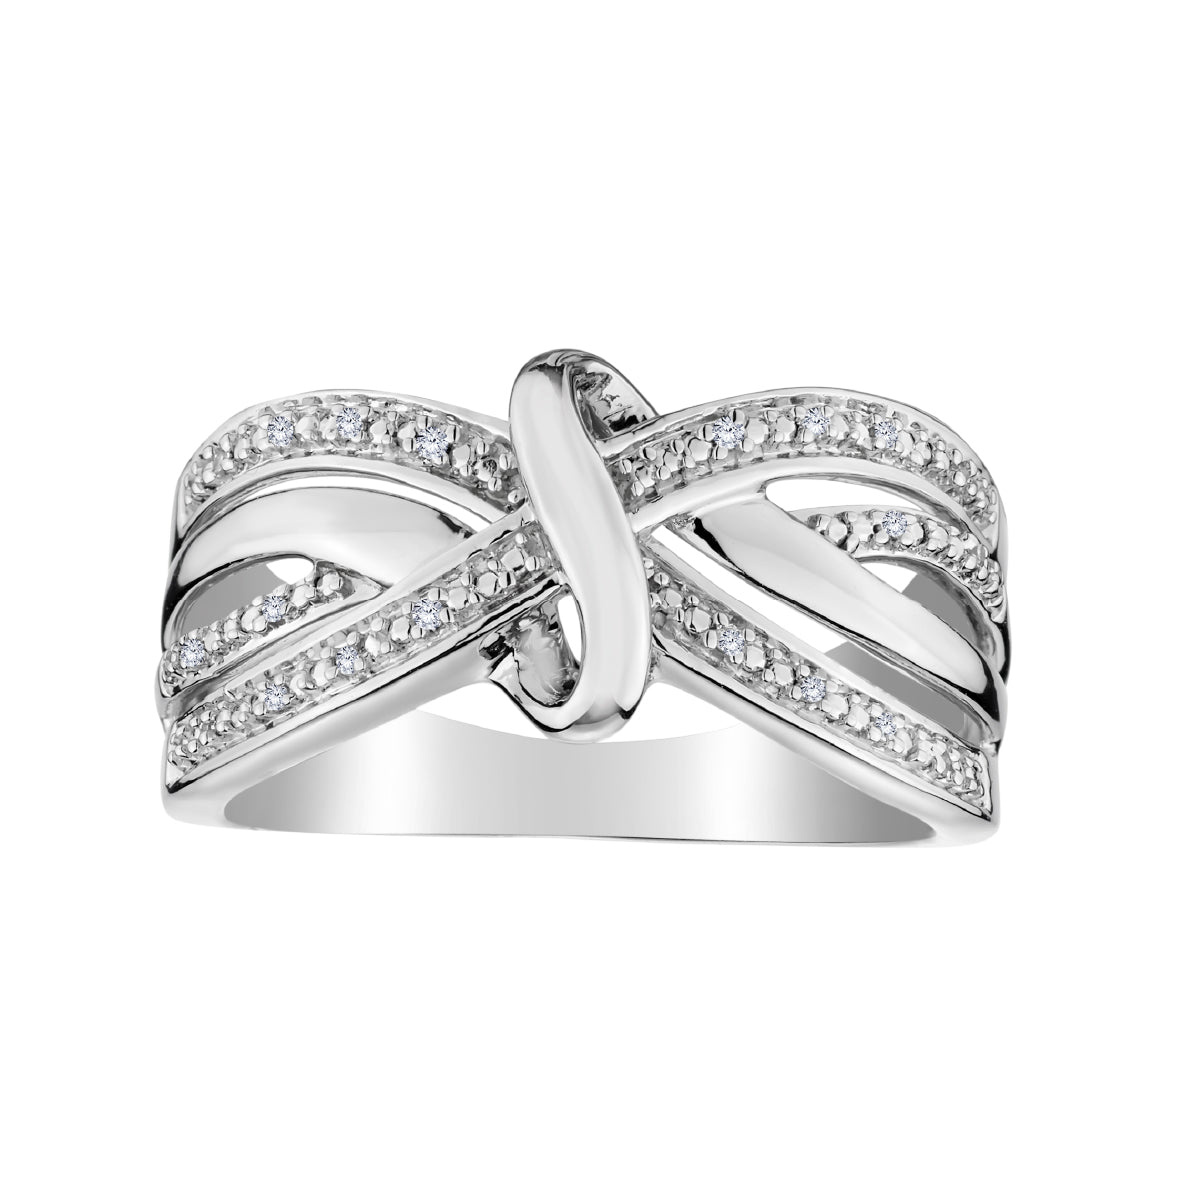 .03 Carat Diamond "Bow" Ring, Sterling Silver. Fashion Rings. Griffin Jewellery Designs